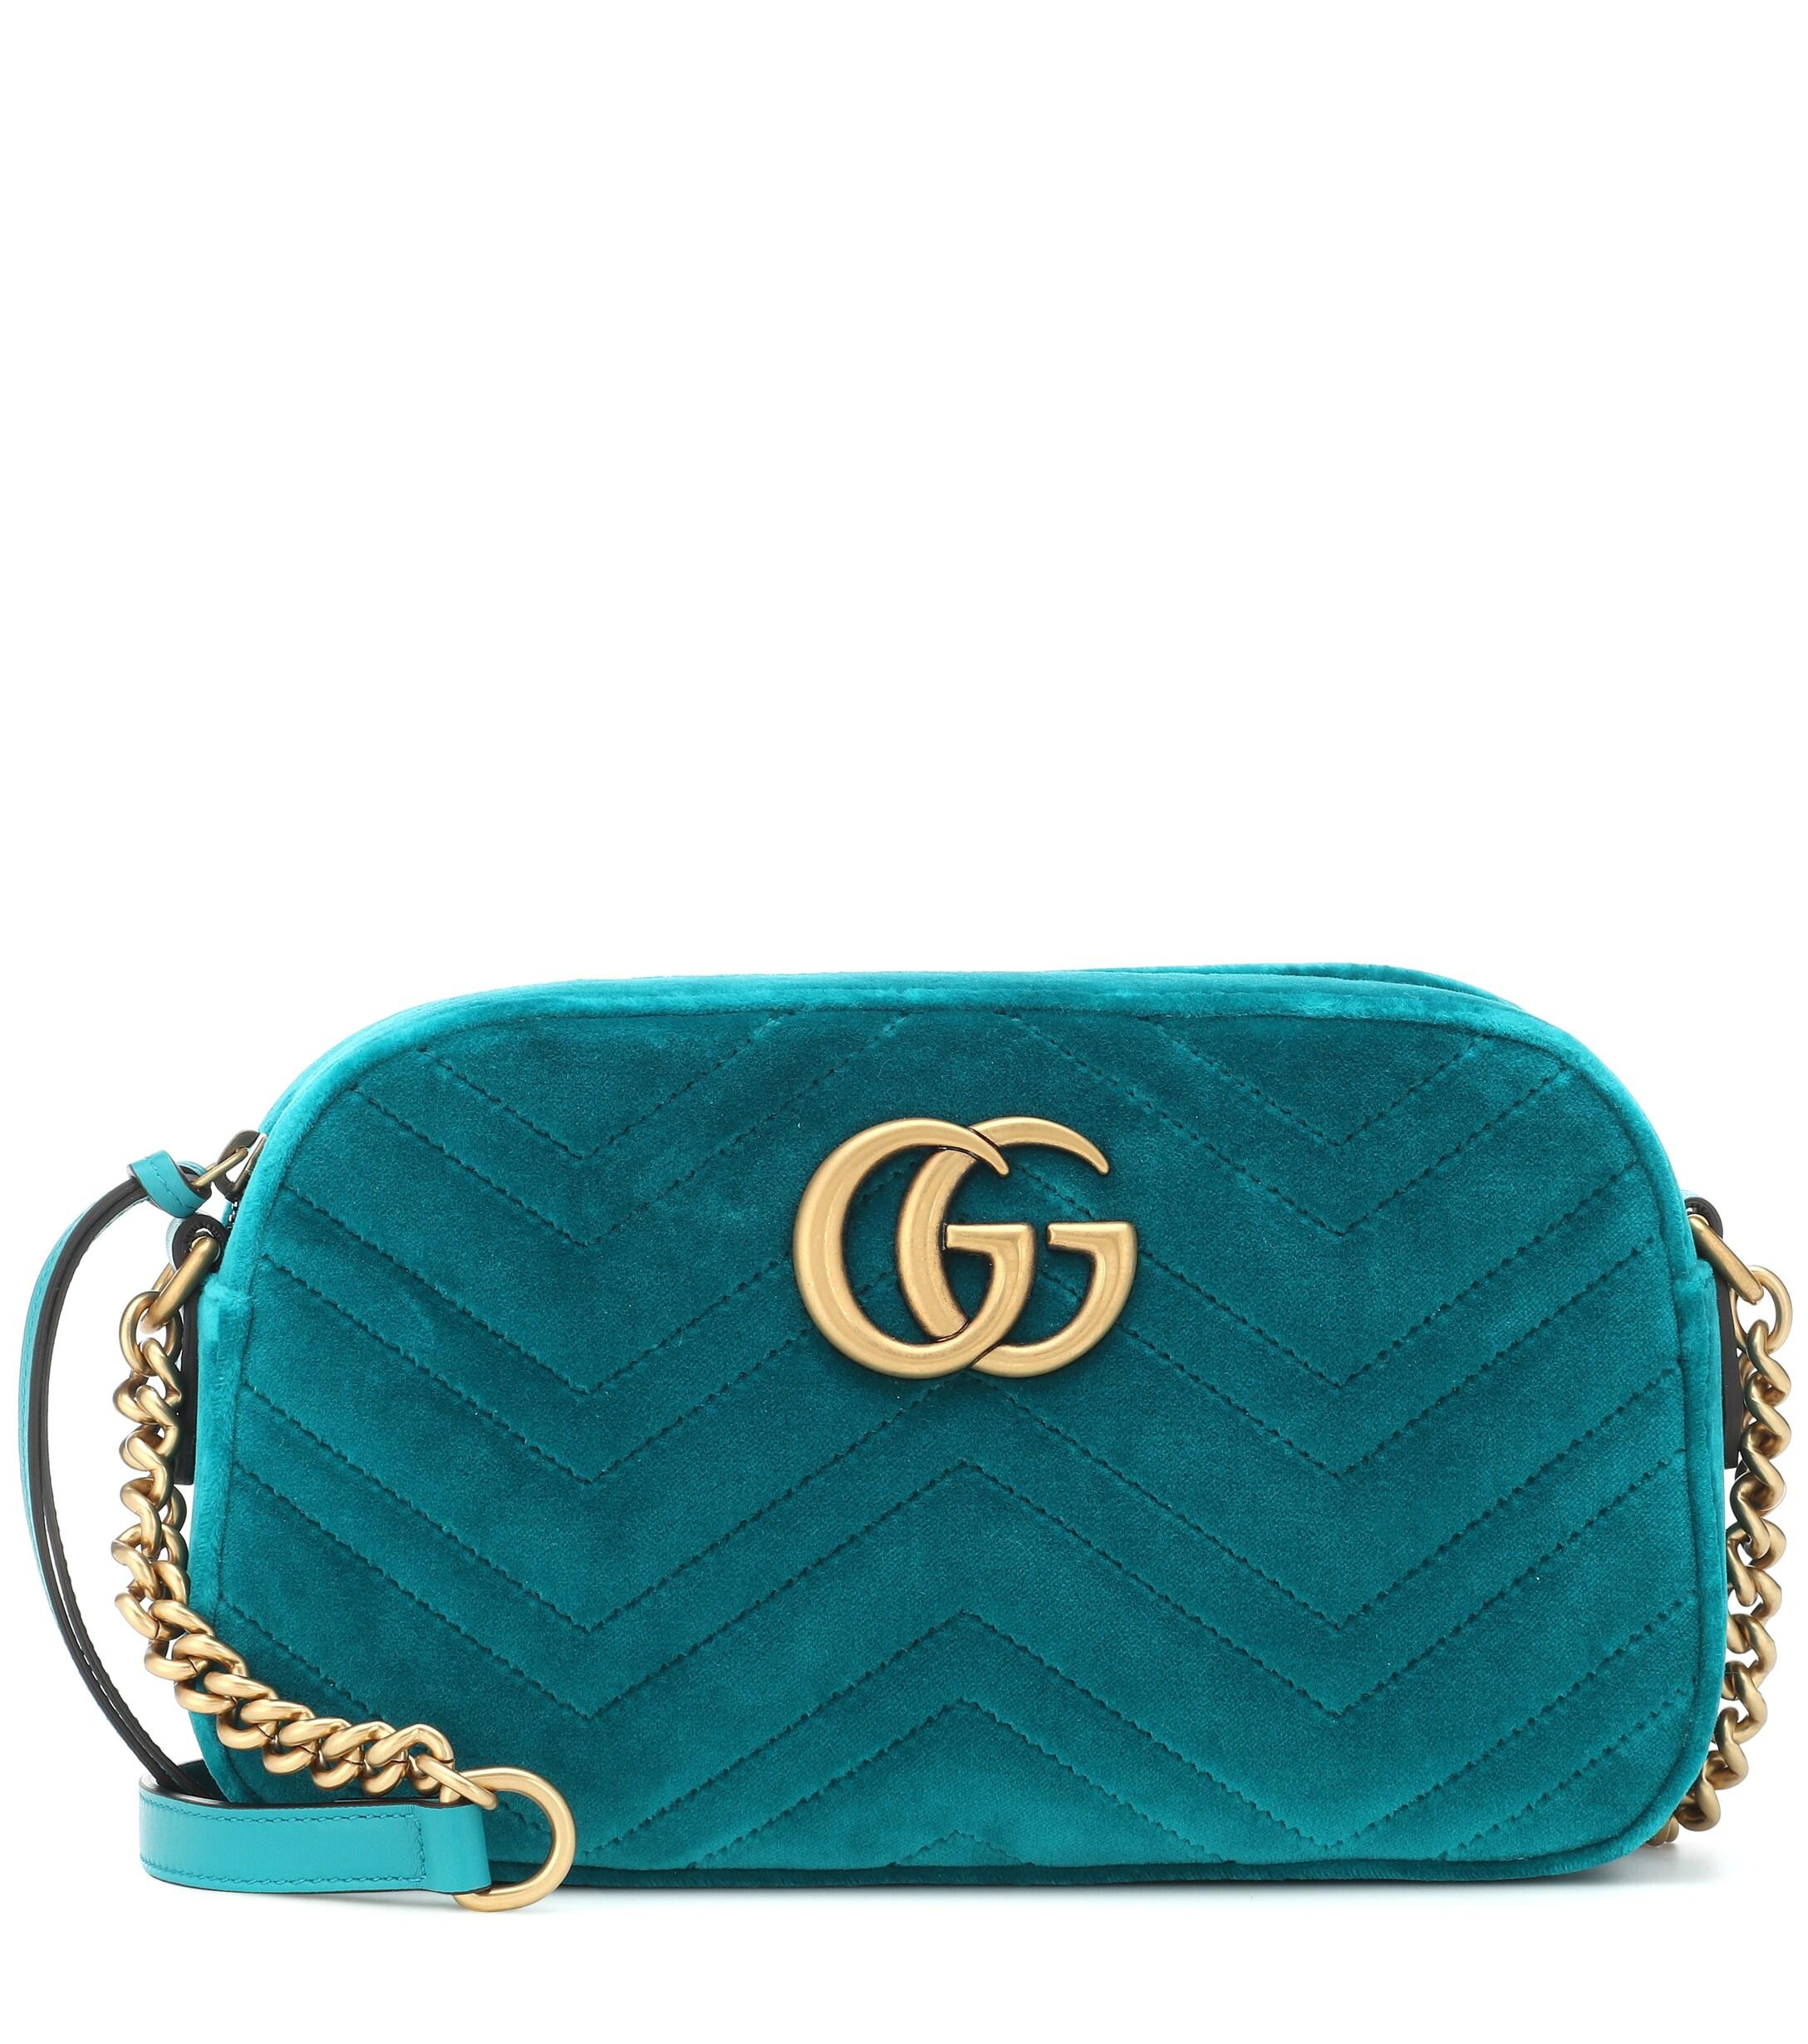 Gucci GG Marmont Small Shoulder Bag in Blue - Save 14% - Lyst